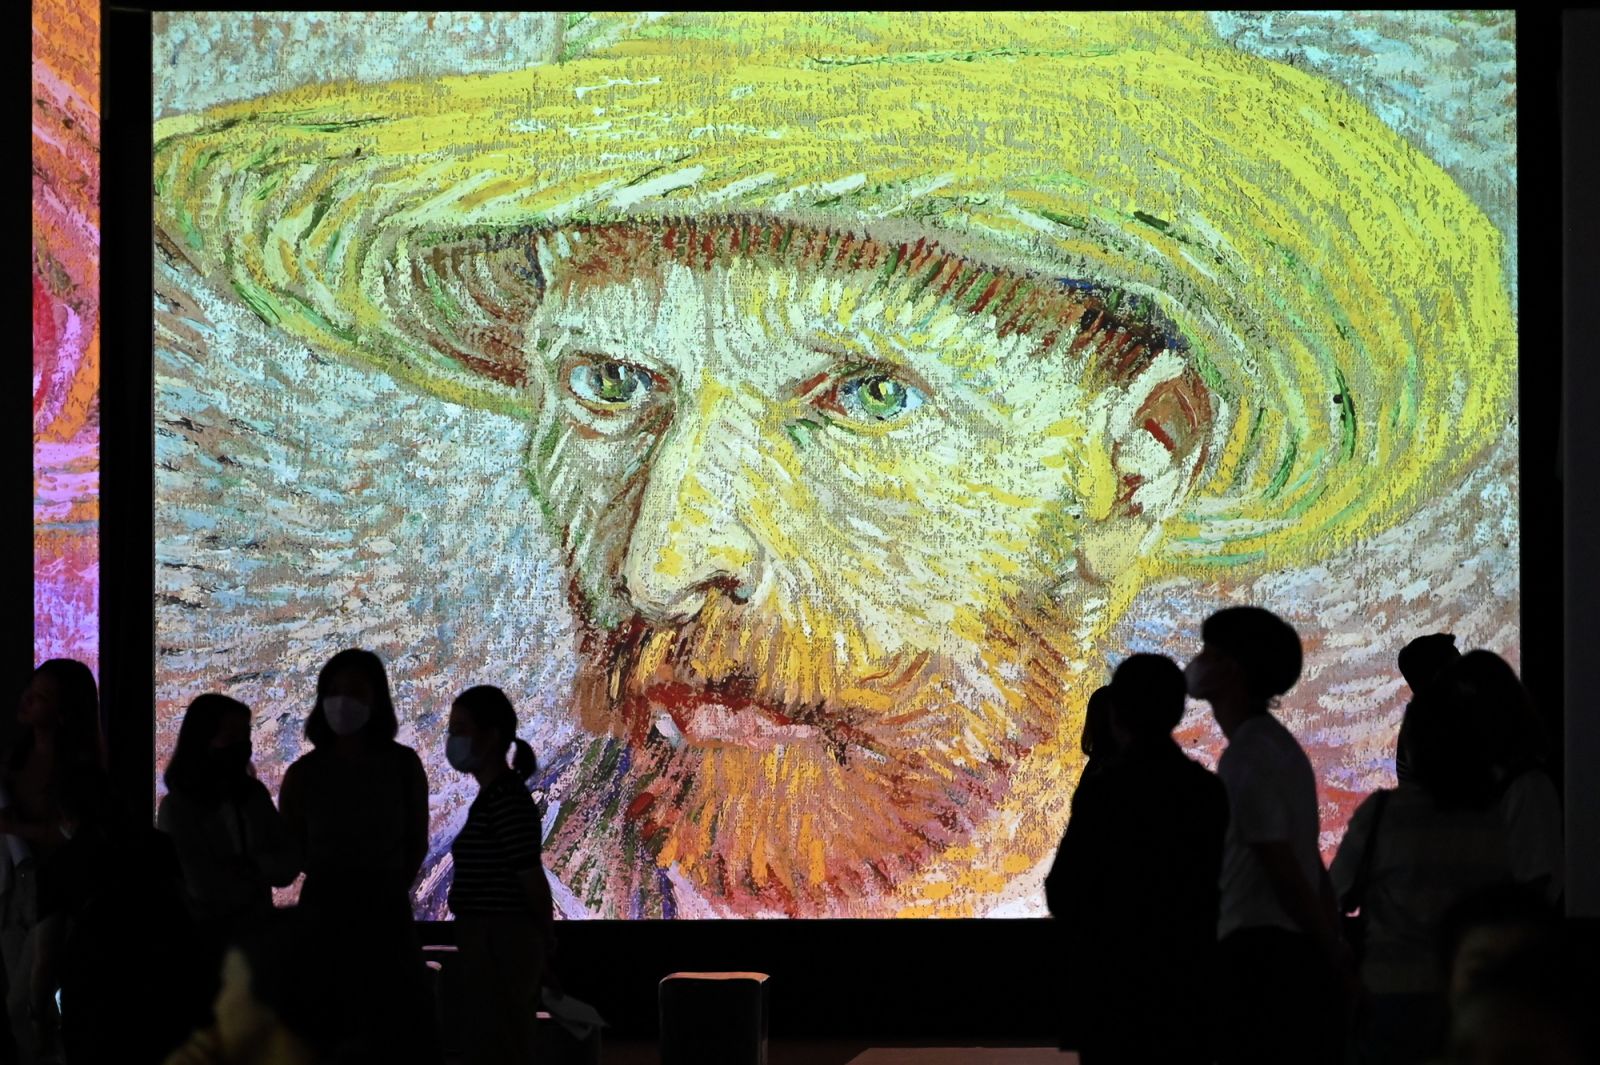 Vincent van Gogh's 'Starry Night' Has Captivated the Public for